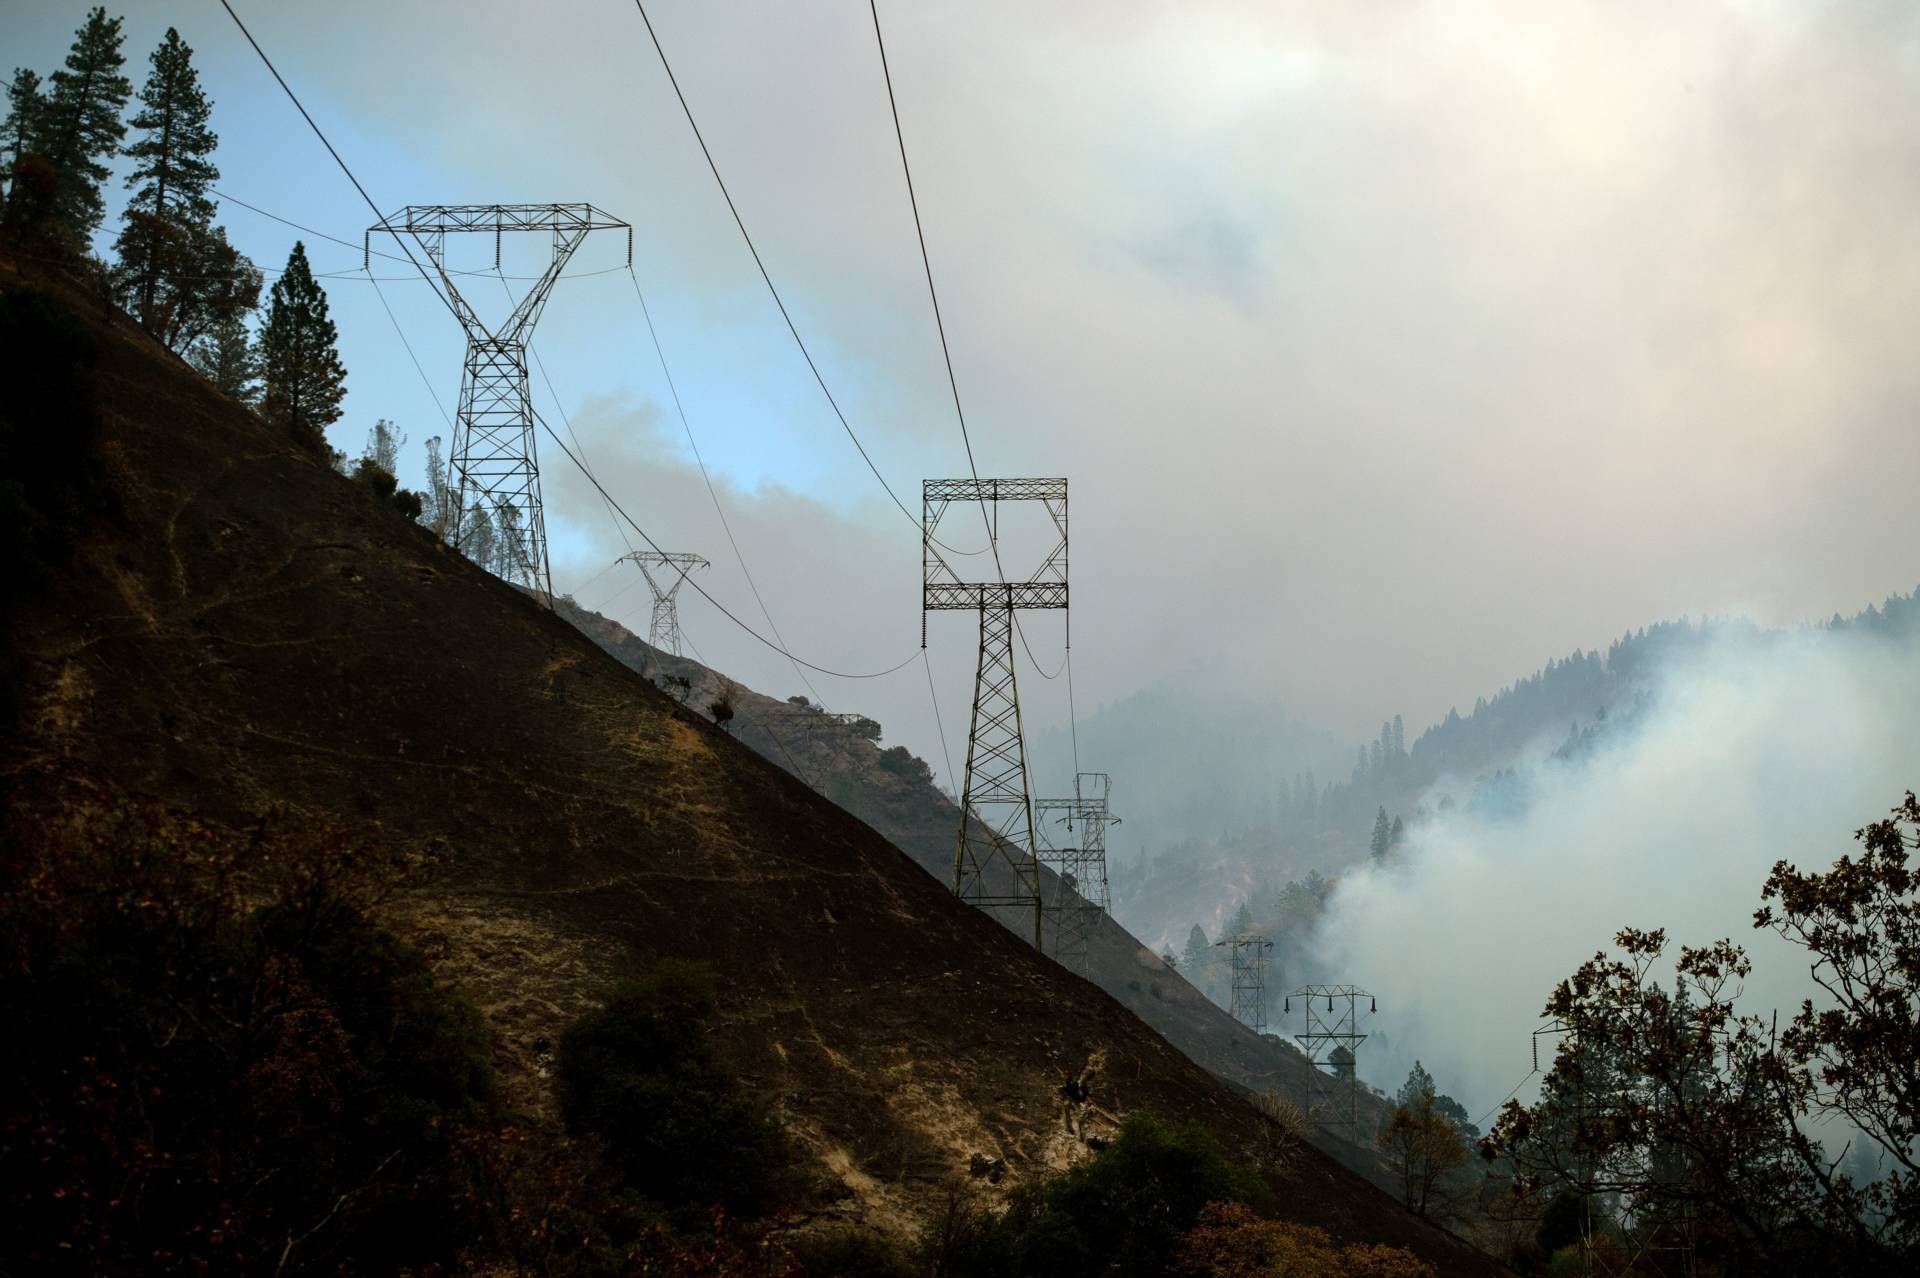 PG&amp;E transmission line towers on the Caribou-Palermo line are seen adjacent to the Feather River in Butte County, close to the spot where officials say the Camp Fire began. In February, PG&amp;E said it's "probable" that its equipment caused the blaze, the deadliest and most destructive in modern California history. Josh Edelson/AFP-Getty Images